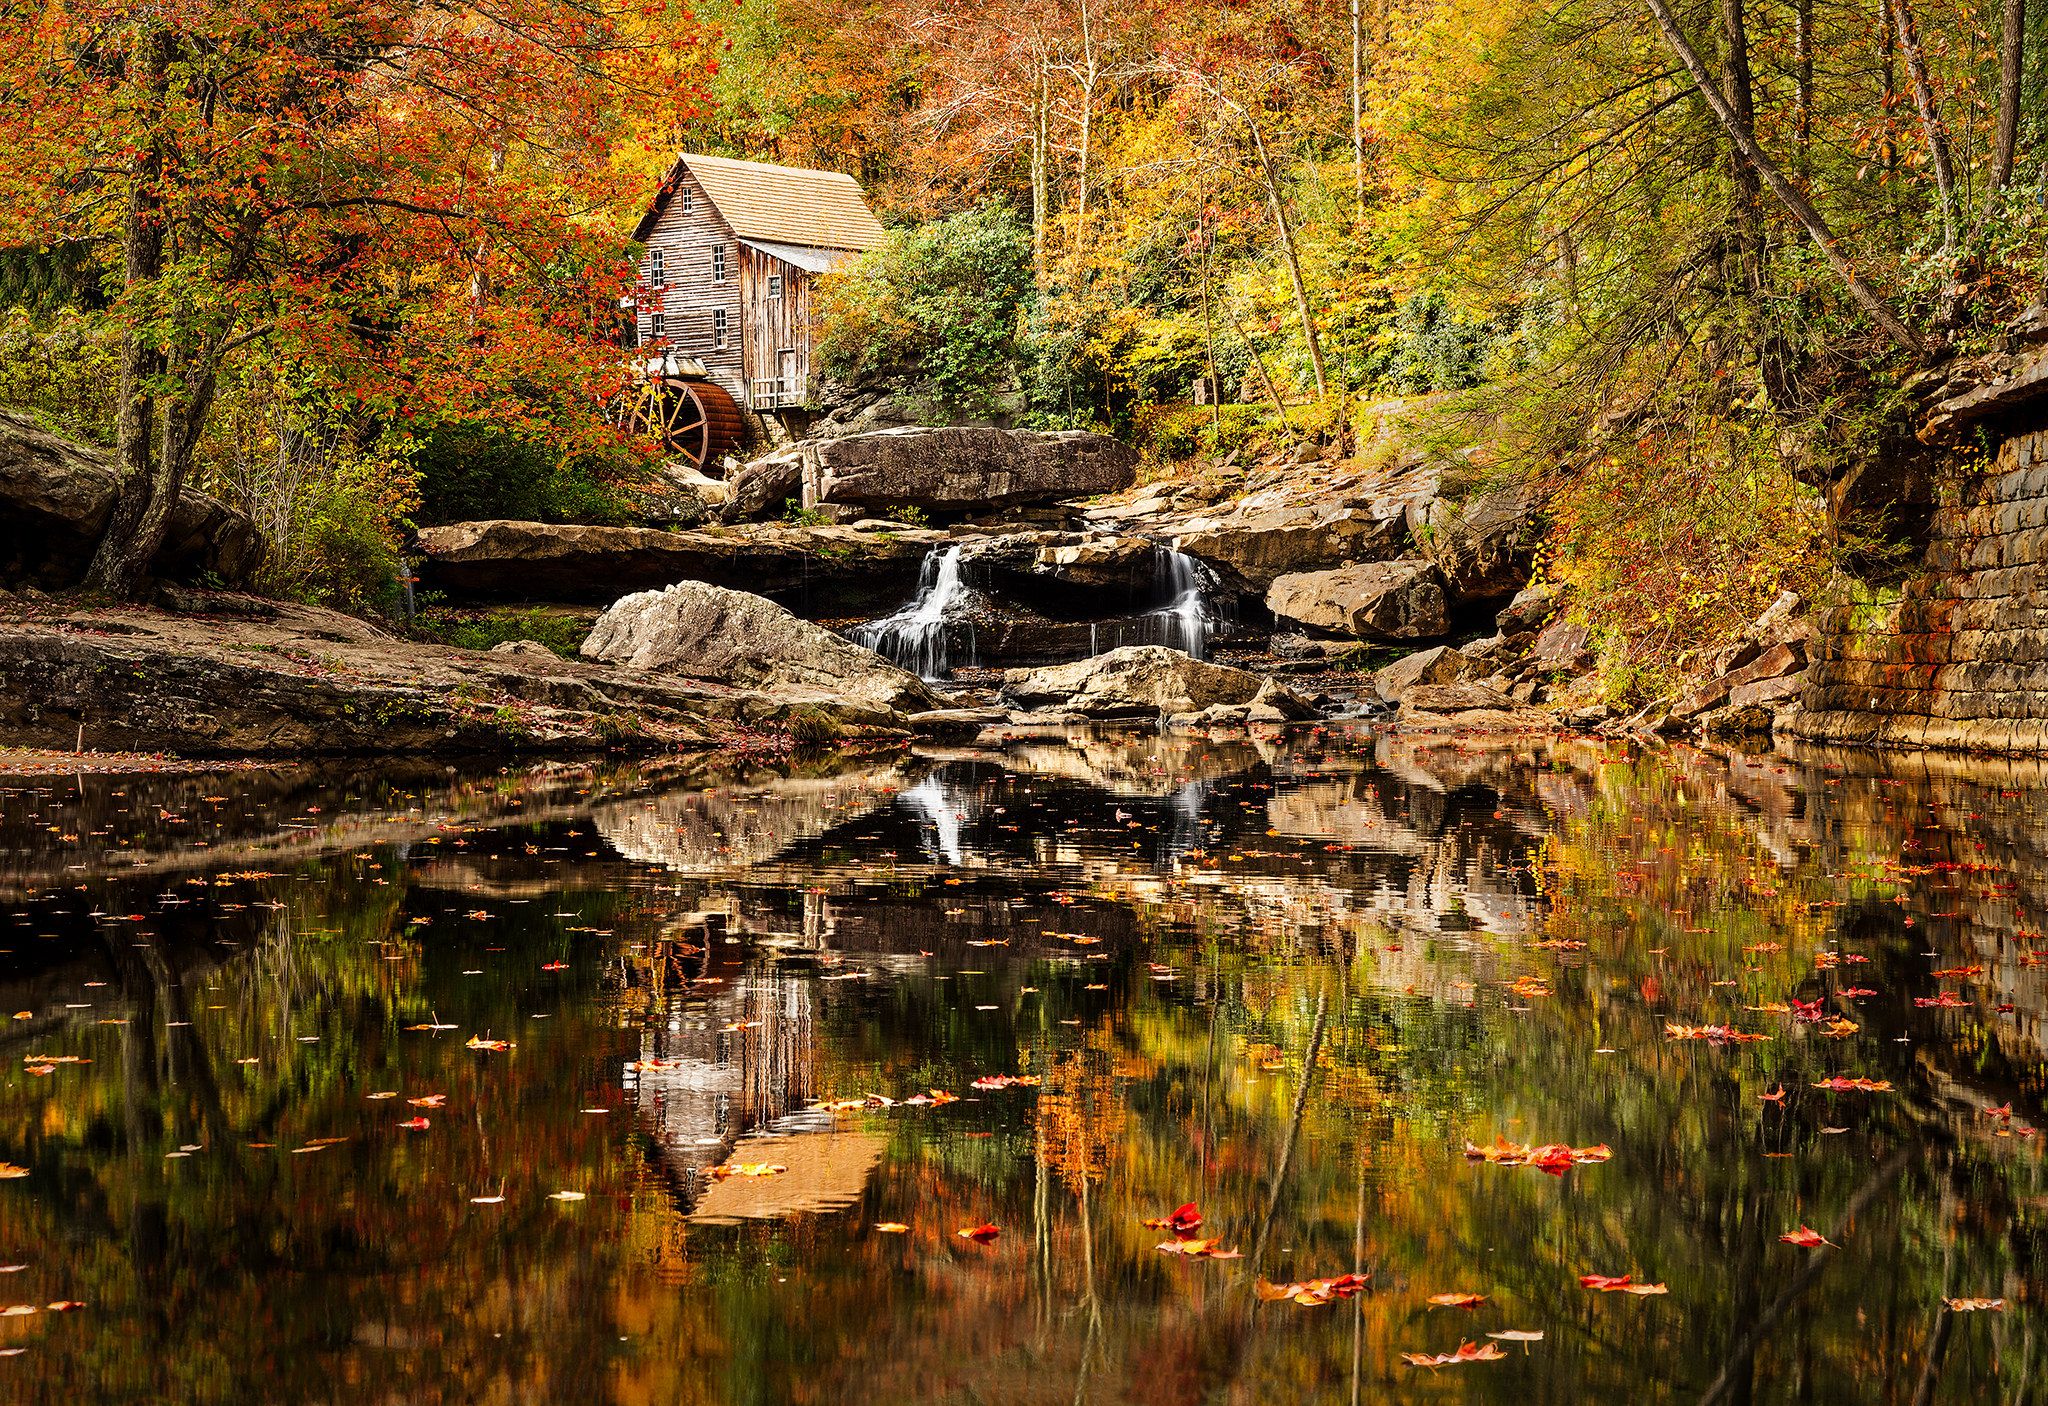 Wallpapers Glade Creek Grist Mill West Virginia Windmill at Glade Creek on the desktop